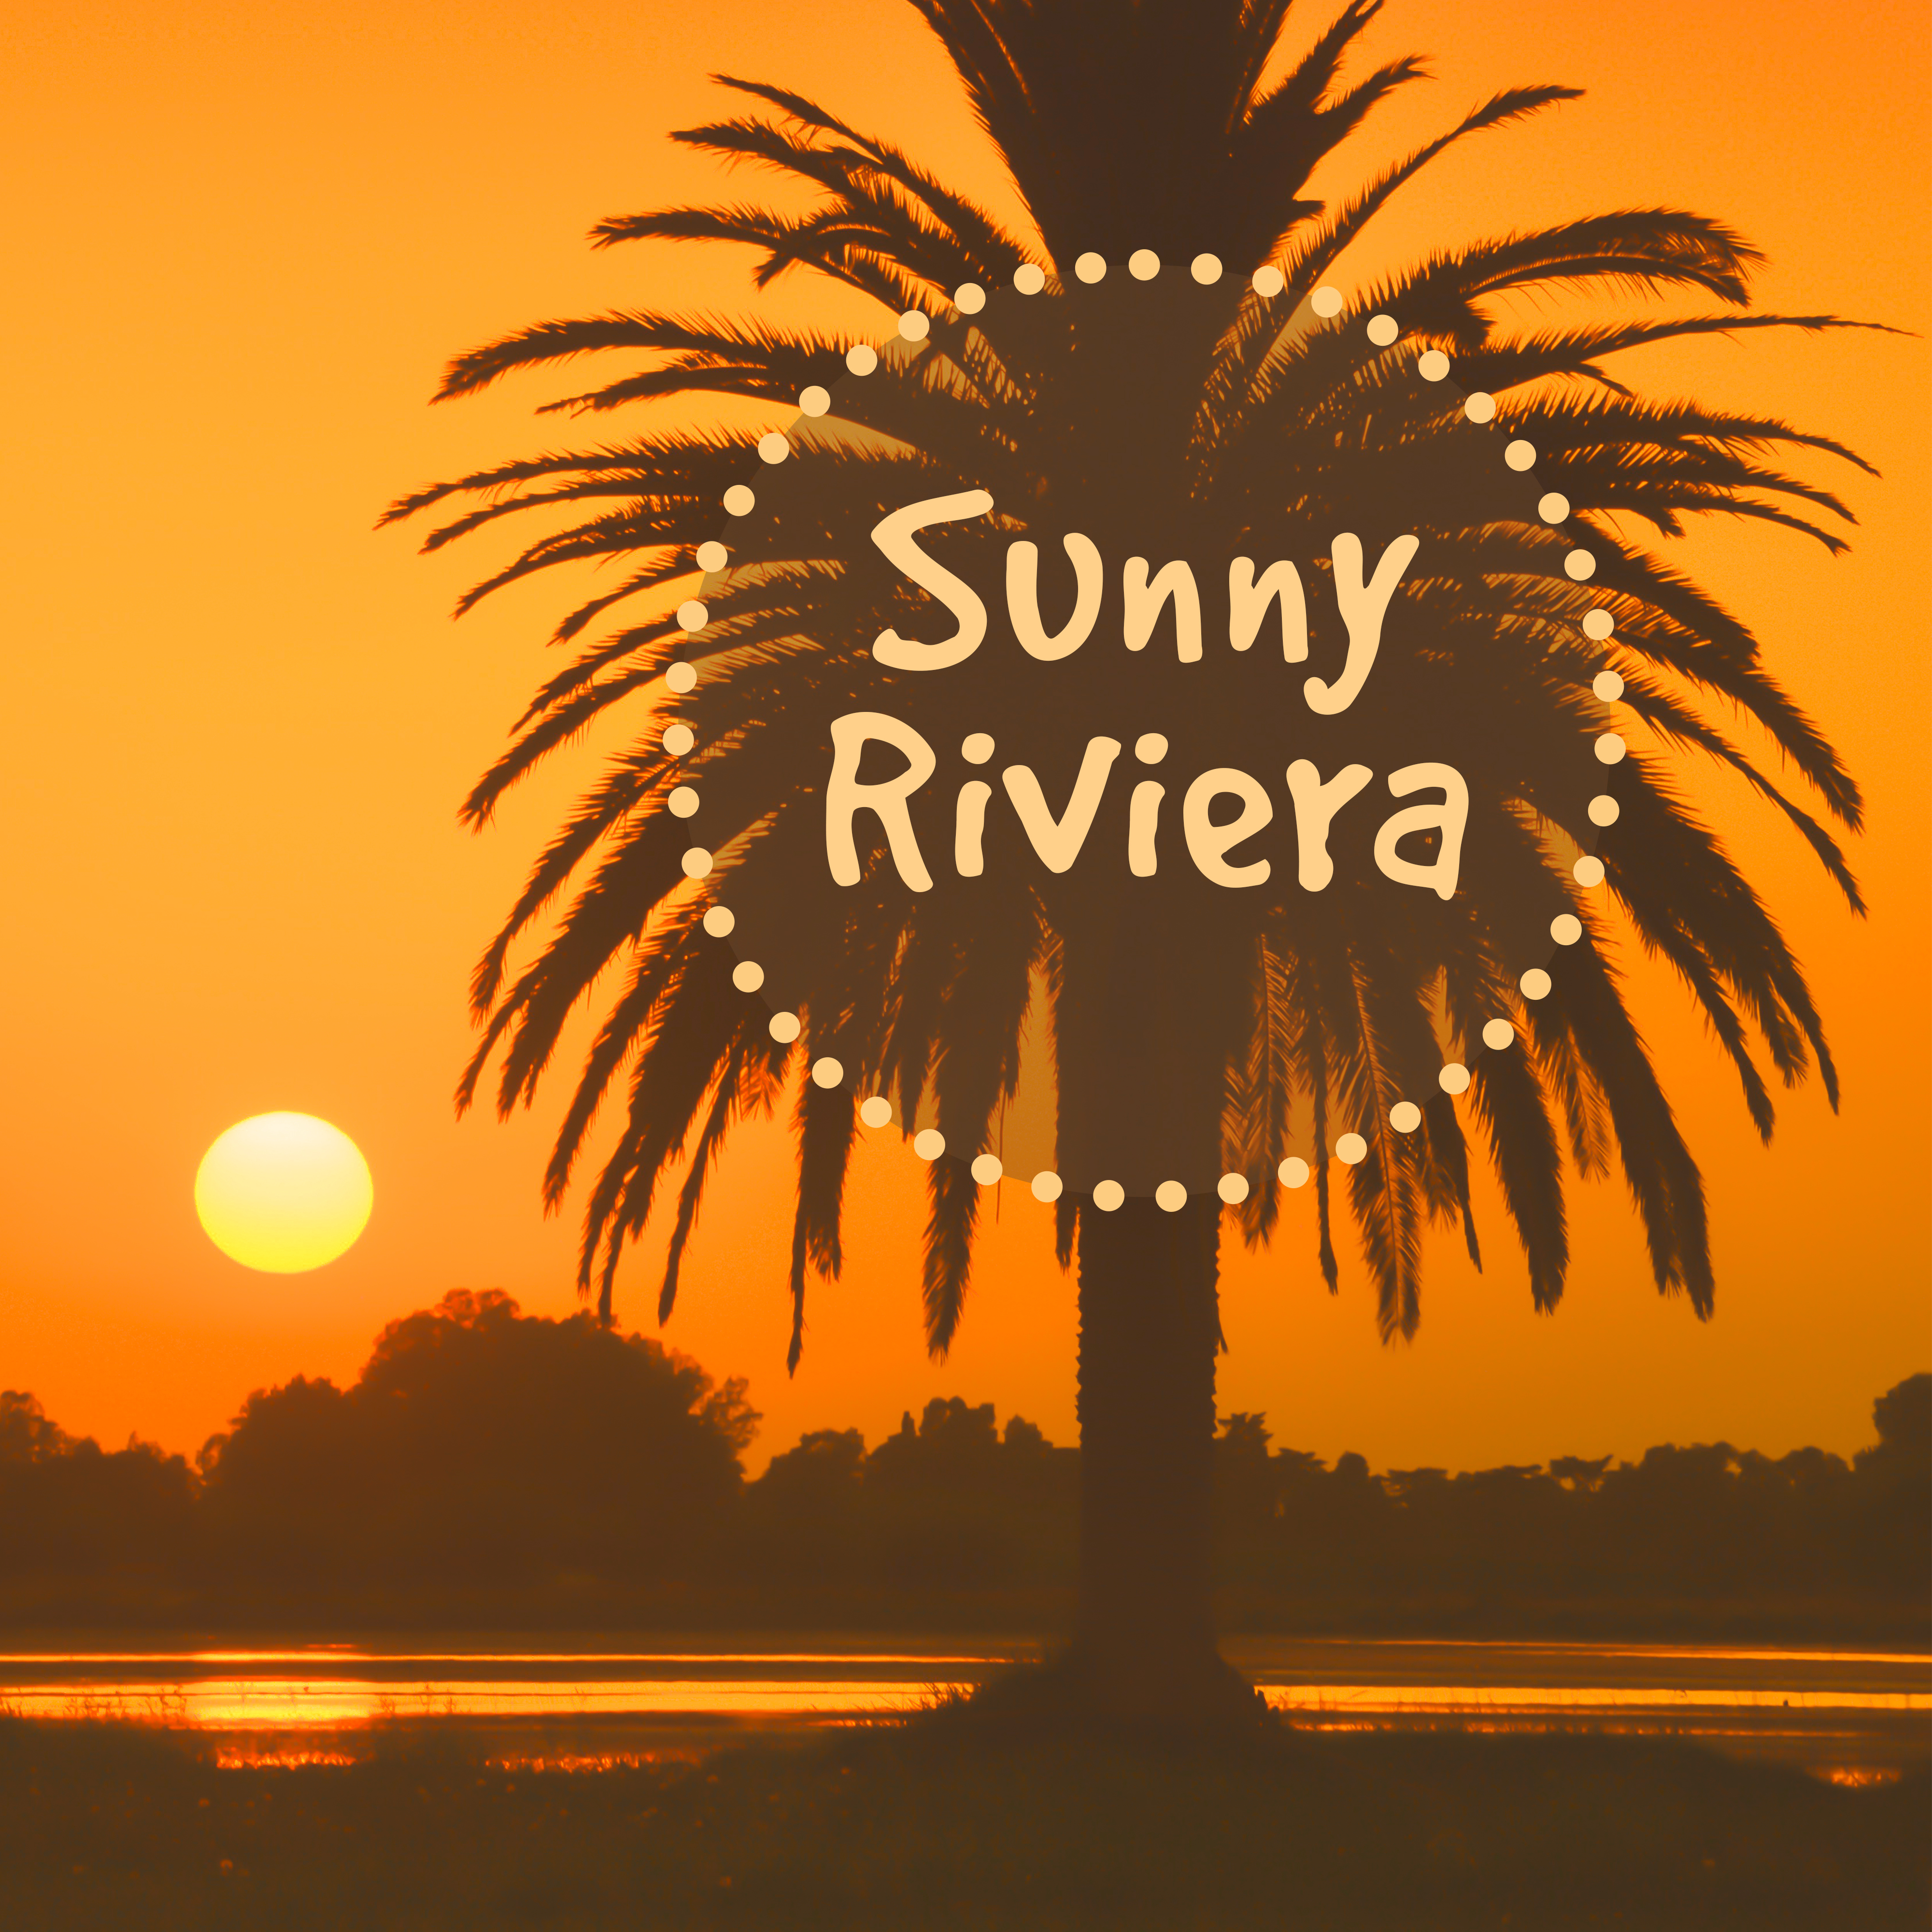 Sunny Riviera – Holiday Chill Out Music, Relax on the Beach, Summer Chill, Ibiza Party, Deep Sun, Holiday Under Palms